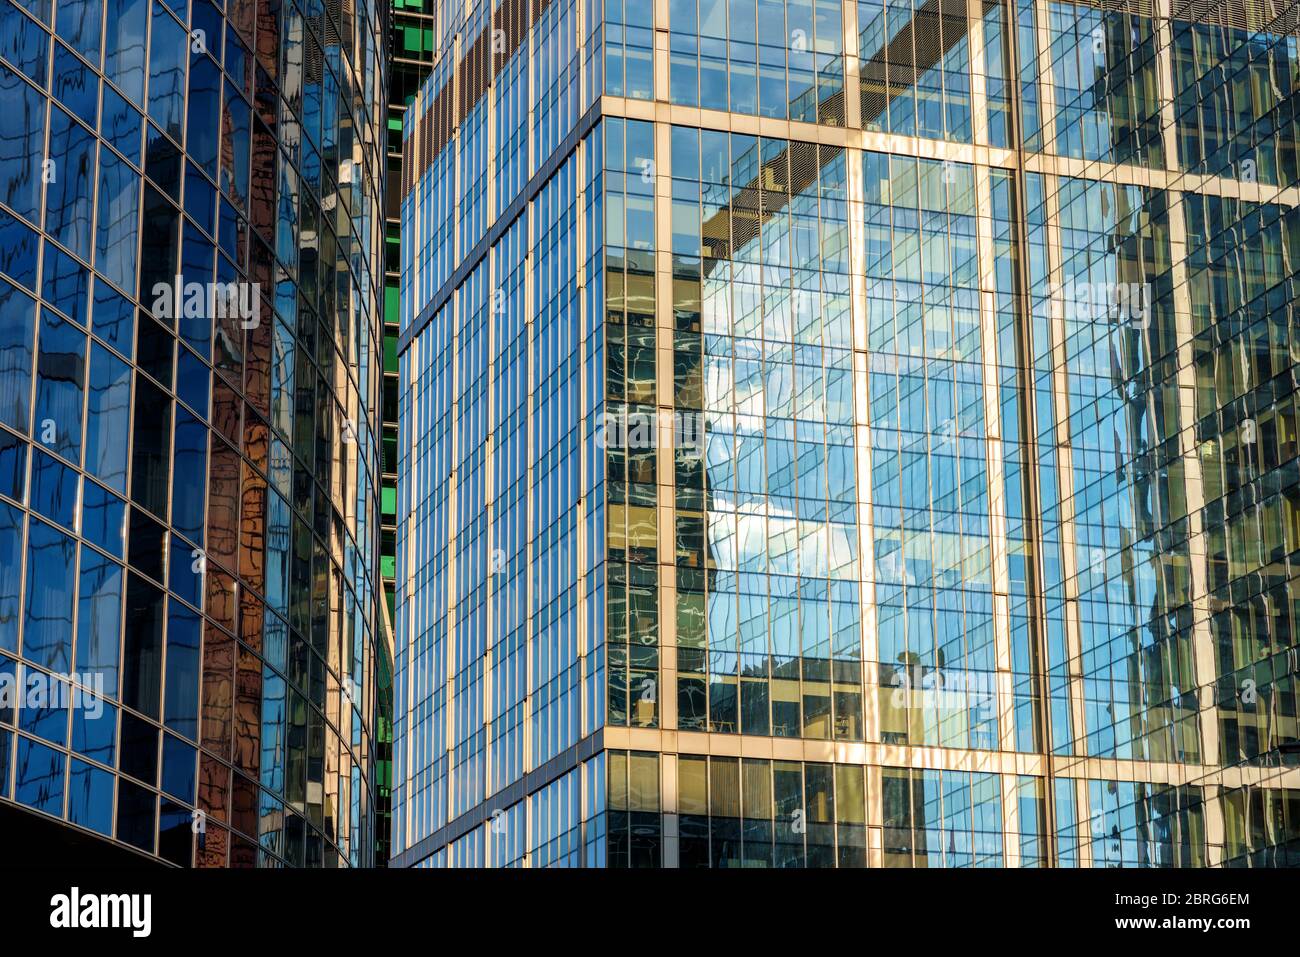 Abstract architecture background. Sky and buildings are reflected in facades of dense office skyscrapers. Steel and glass urban style close-up. Concep Stock Photo